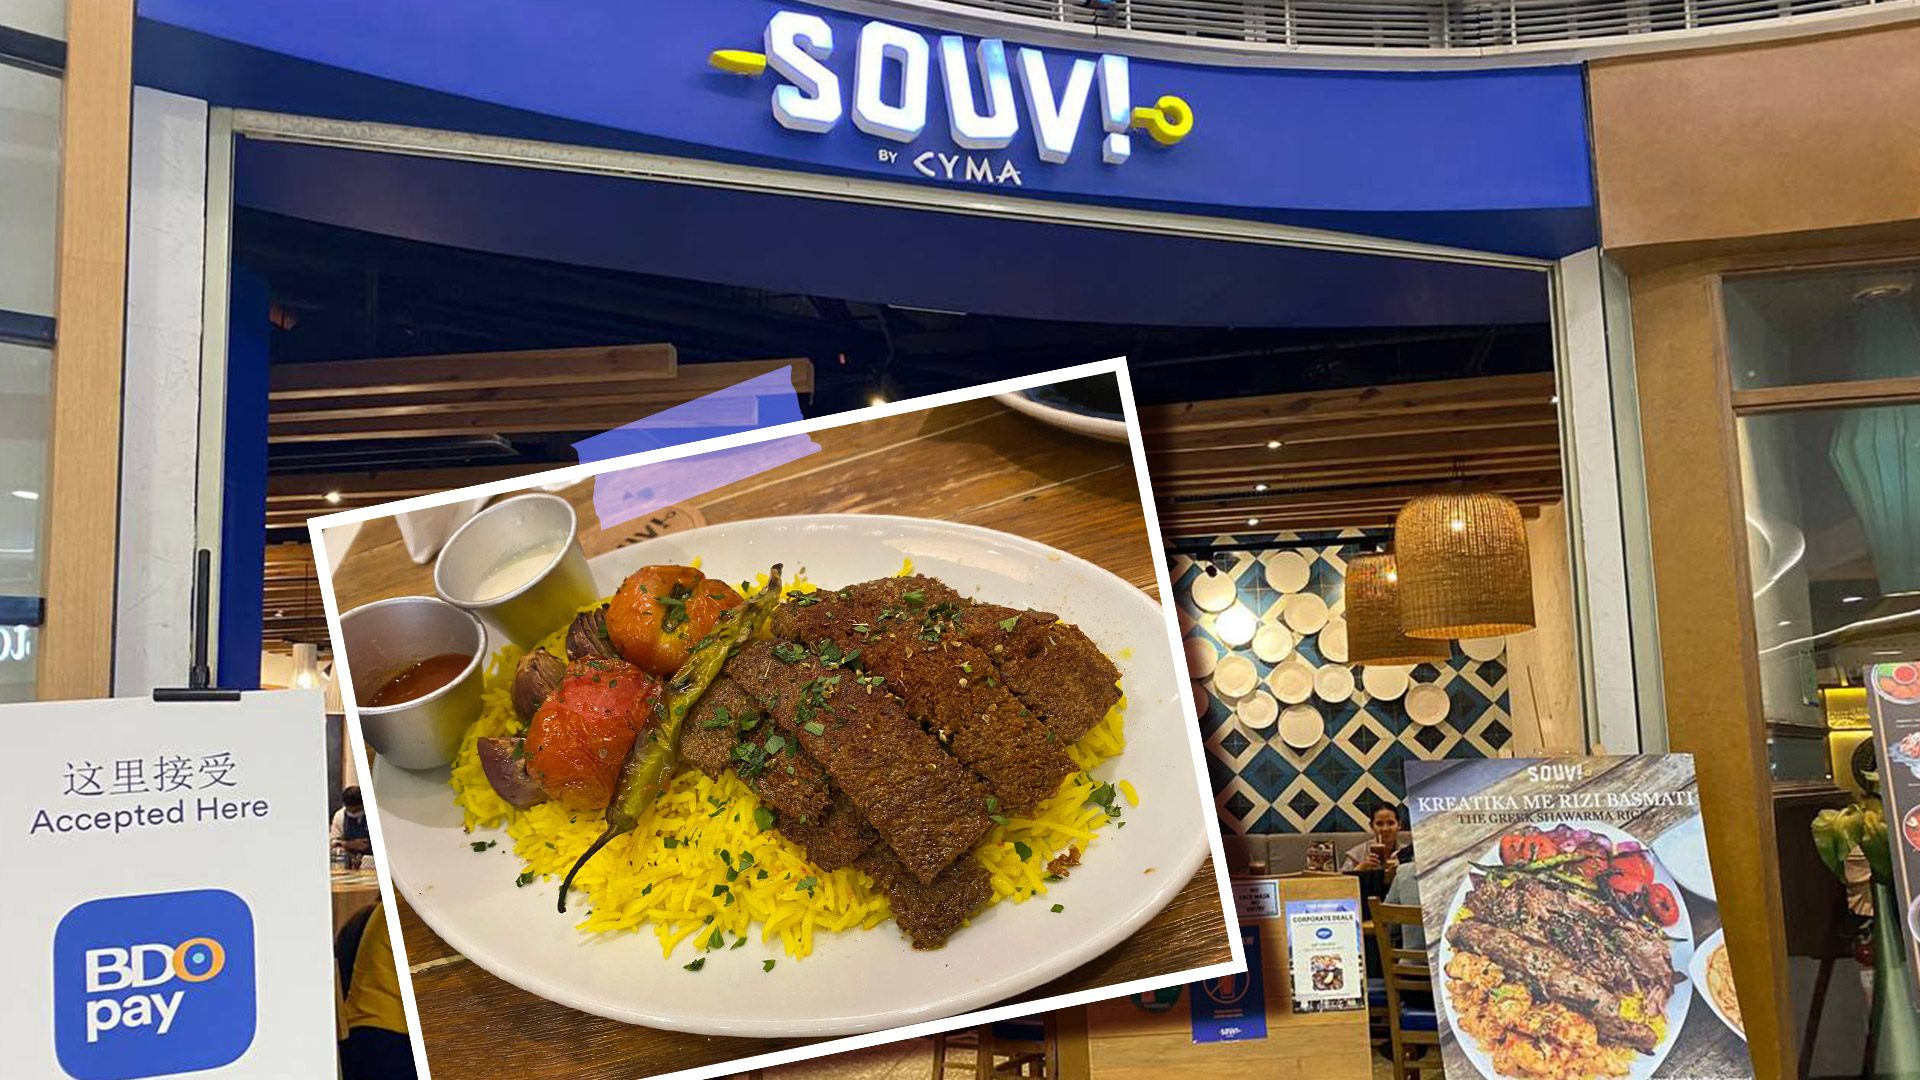 Cyma, Souv! now serve ‘meatless lamb’ dishes with plant-based brand Amala